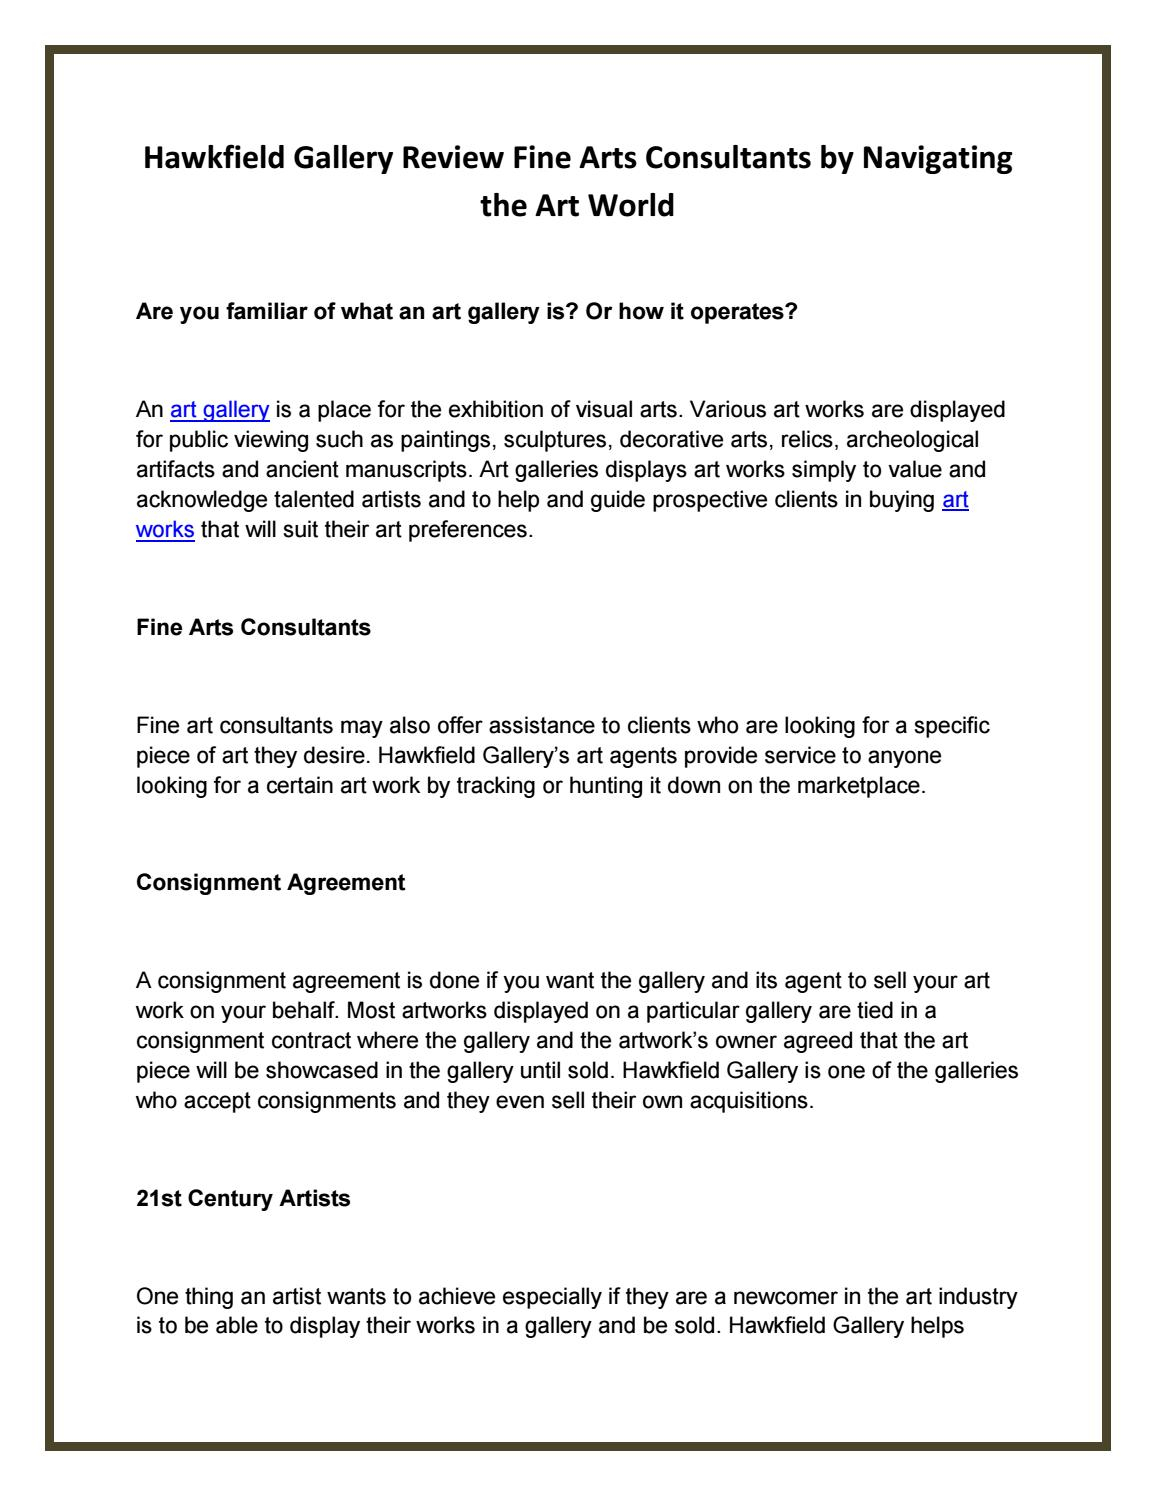 Gallery Consignment Agreement Hawkfield Gallery Review Fine Arts Consultants Navigating The Art